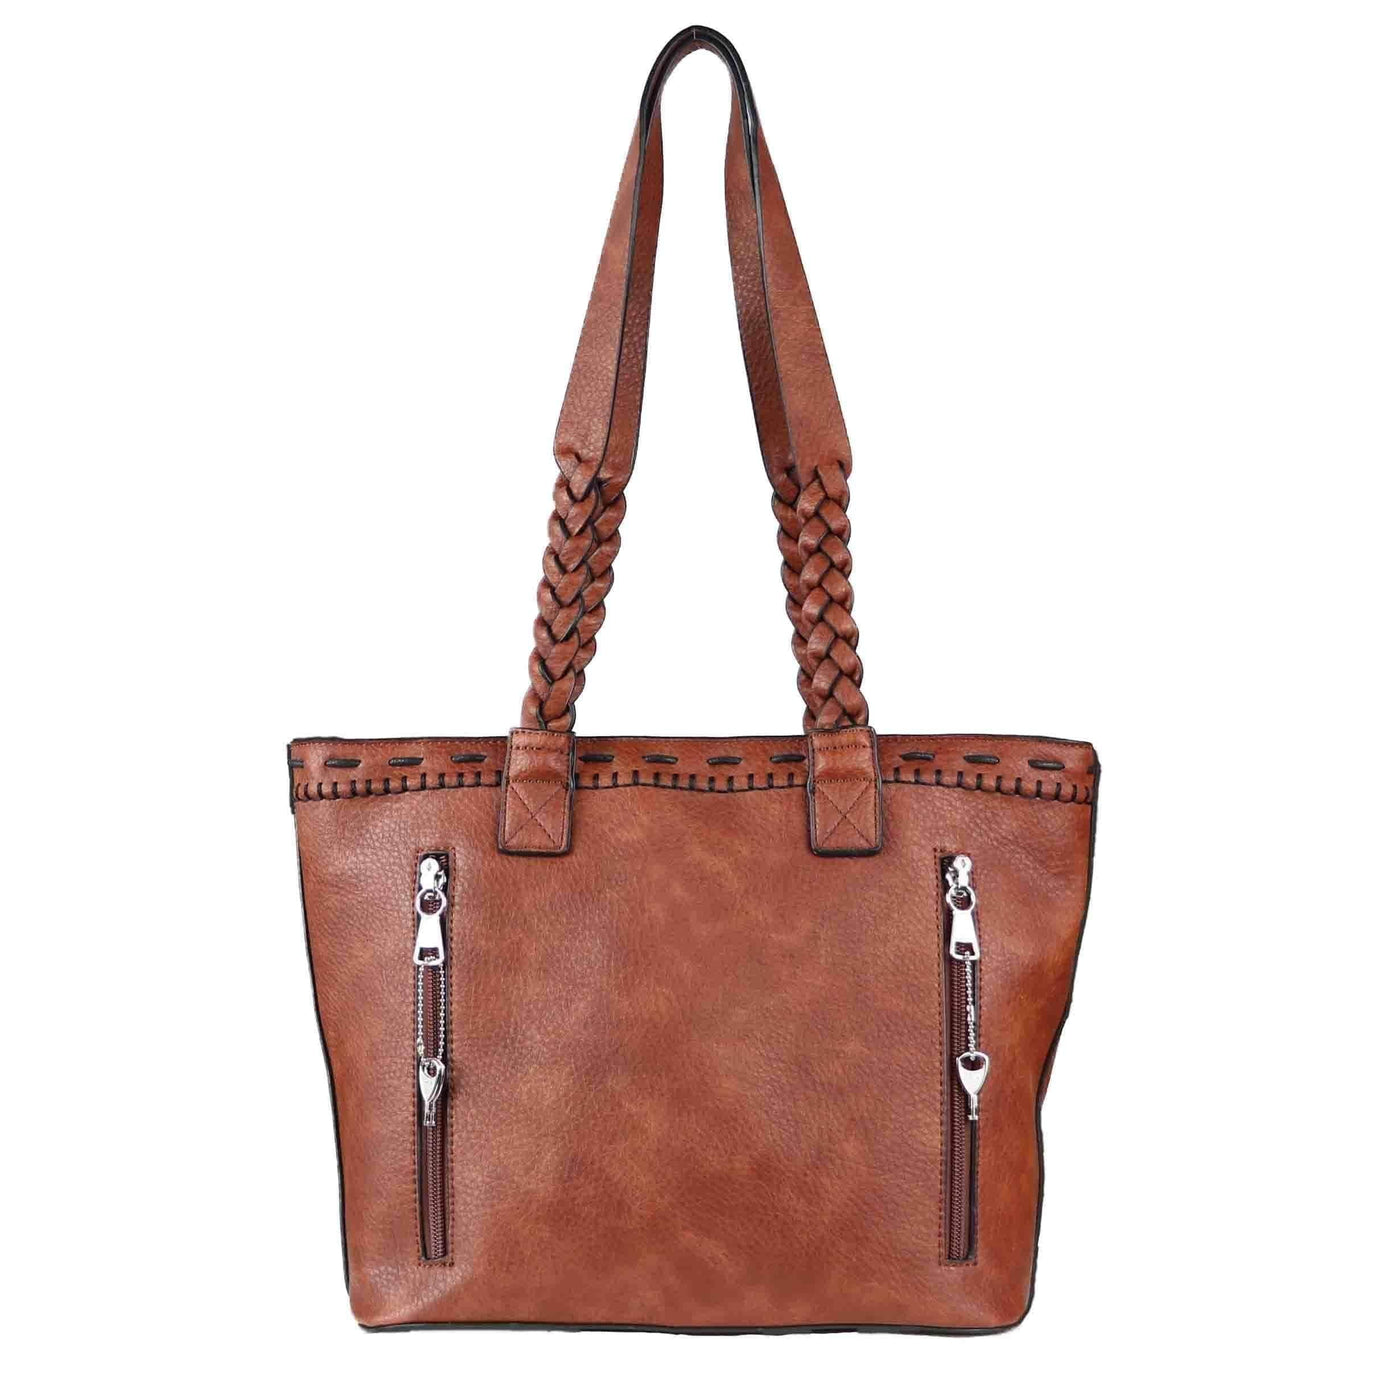 Concealed Carry Sophia Tote by Lady Conceal – www.itsinthebagboutique.com